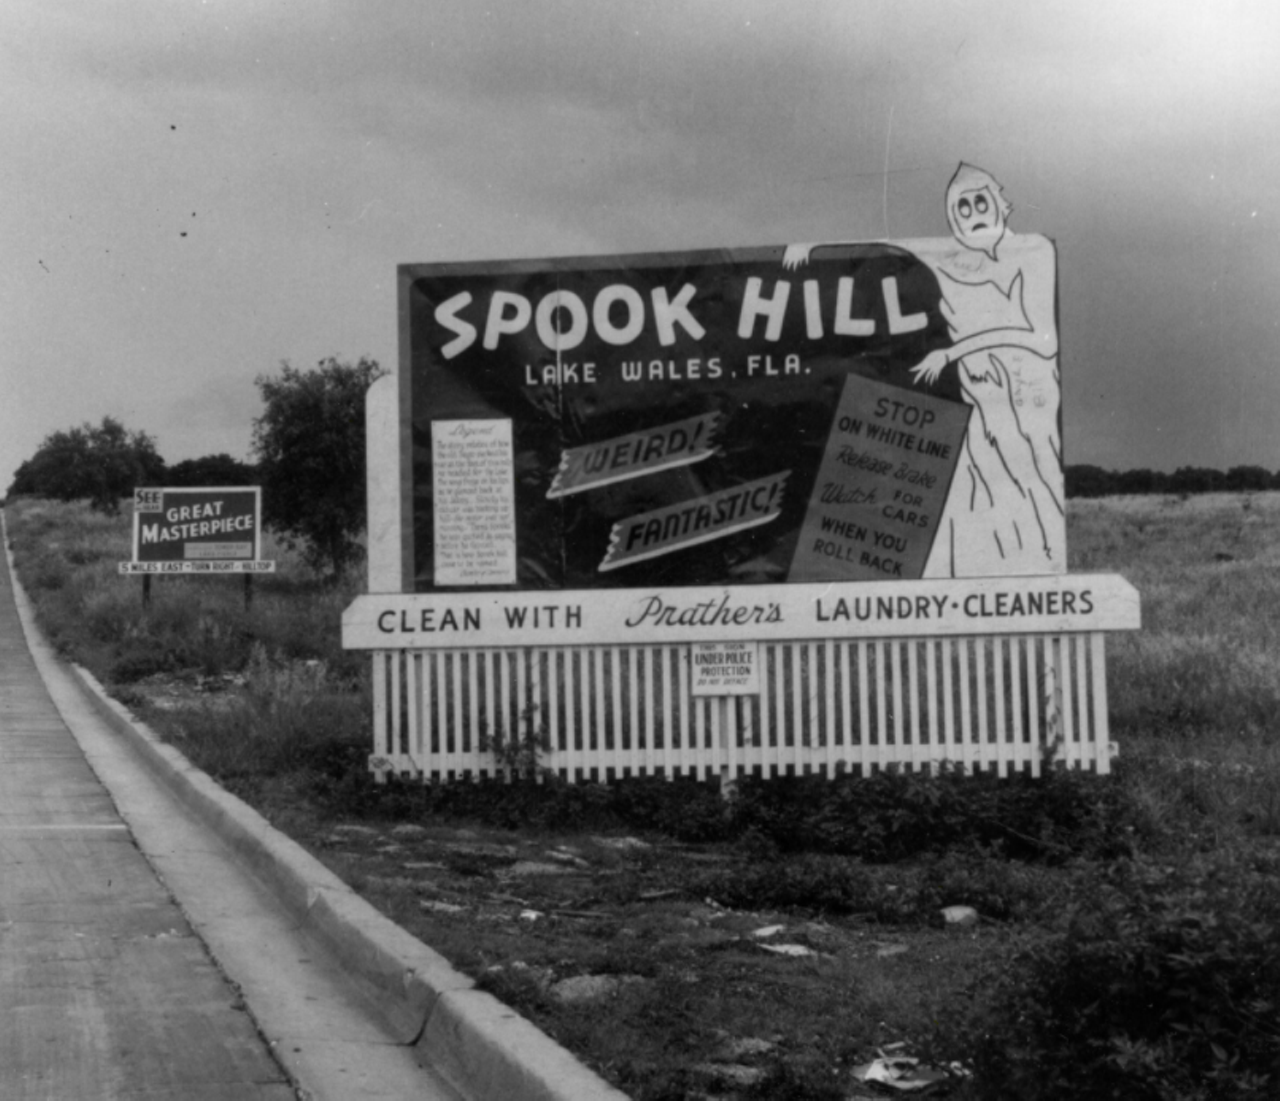 Get spooked at Spook Hill
Lake Wales, Click here for more info  
Watch cars defy gravity at this Lake Wales roadside phenomenon, which was recently added to the National Register of Historic Places.
Photo via Spook Hill/Website